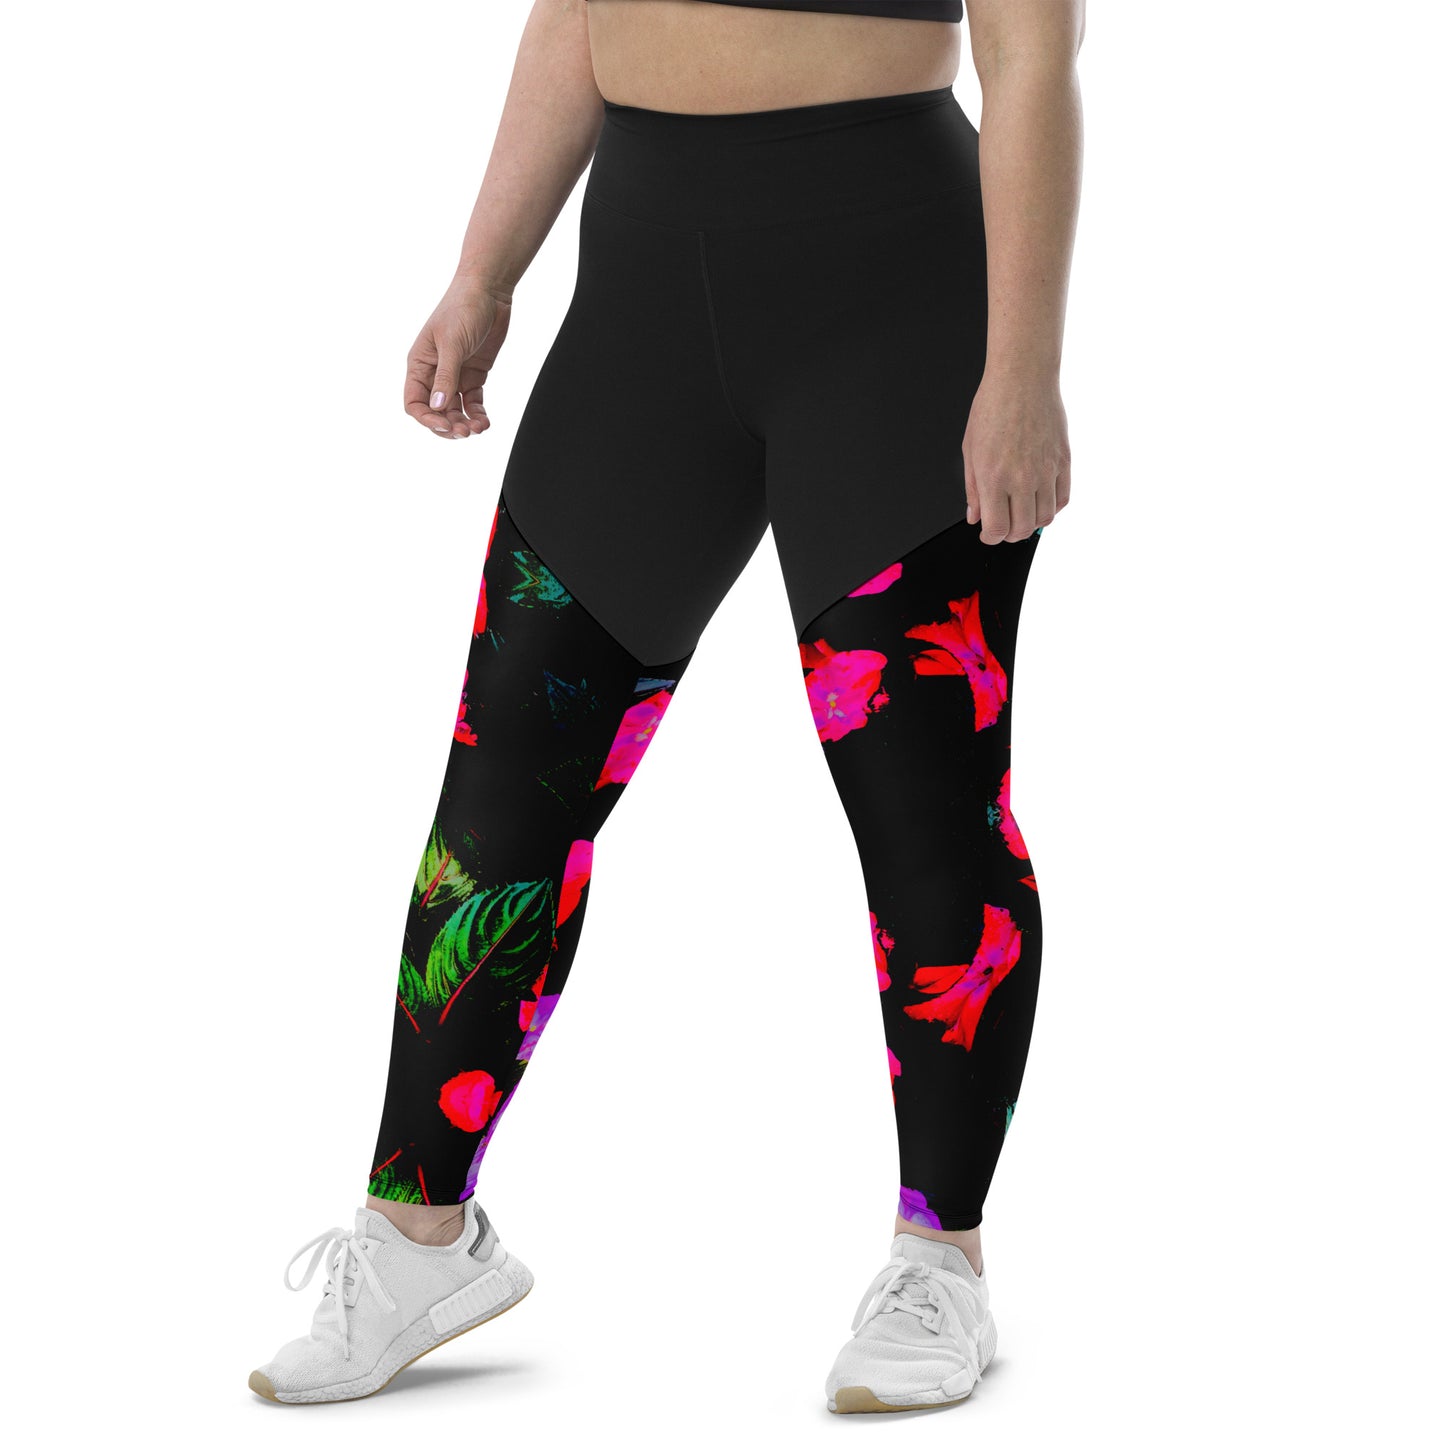 Busy Lizzy Performance Leggings with pocket